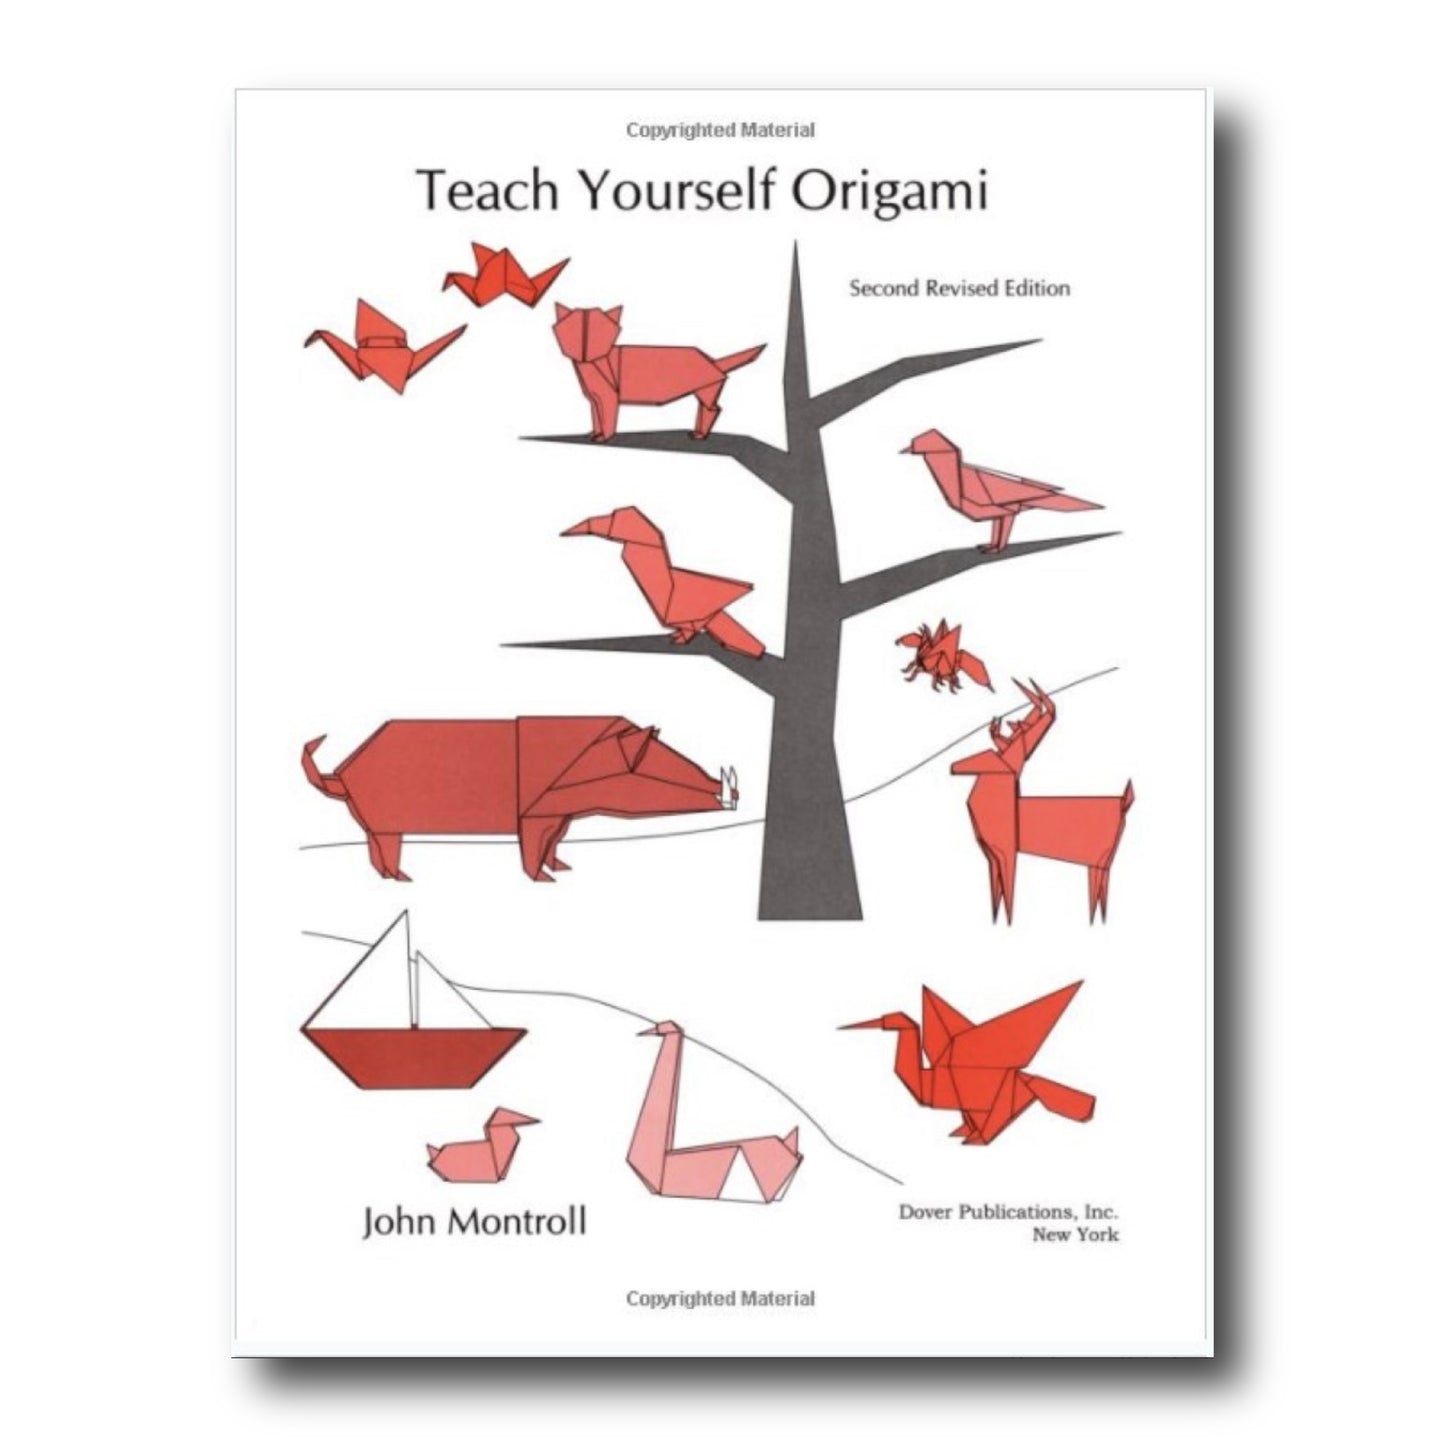 Teach Yourself Origami: Second Revised Edition